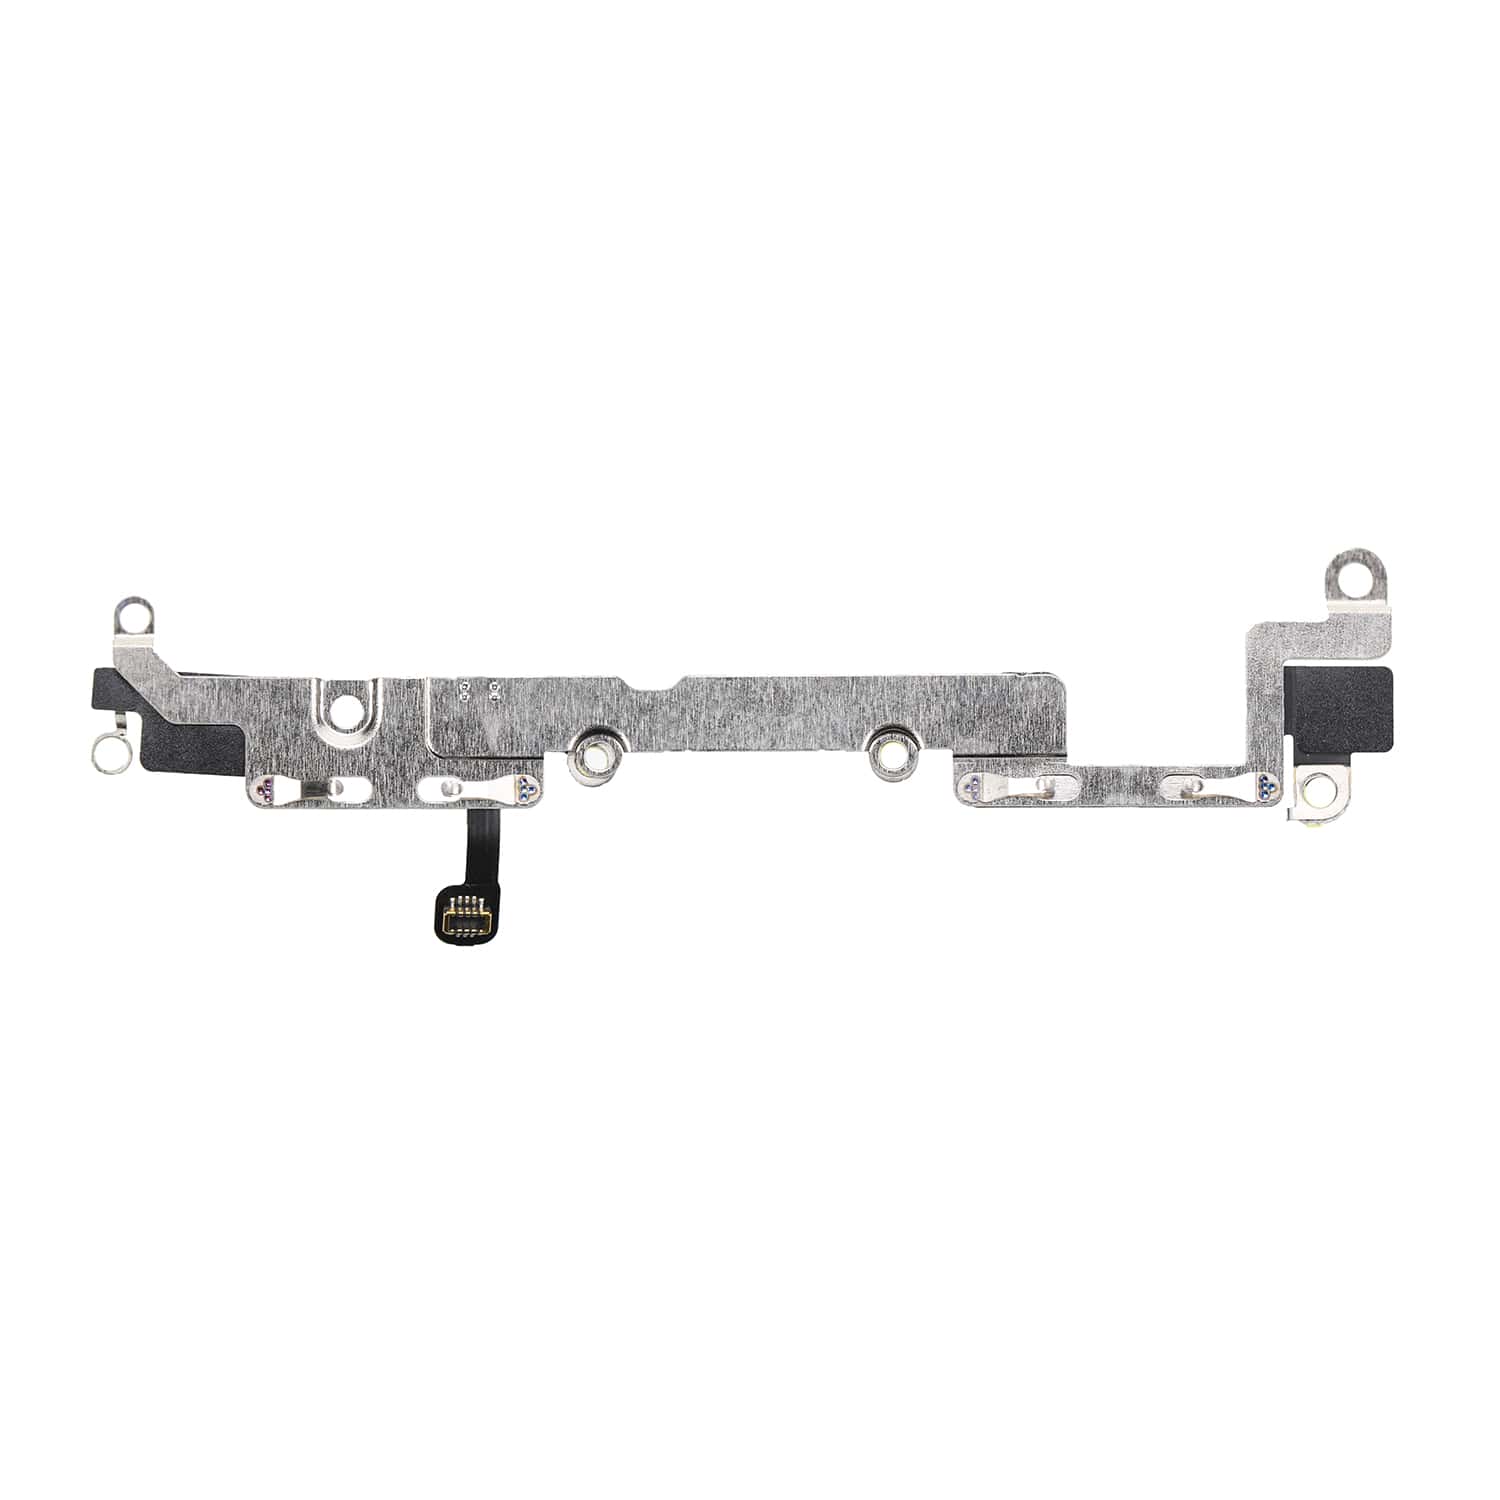 AUDIO ANTENNA FLEX CABLE FOR IPHONE XR